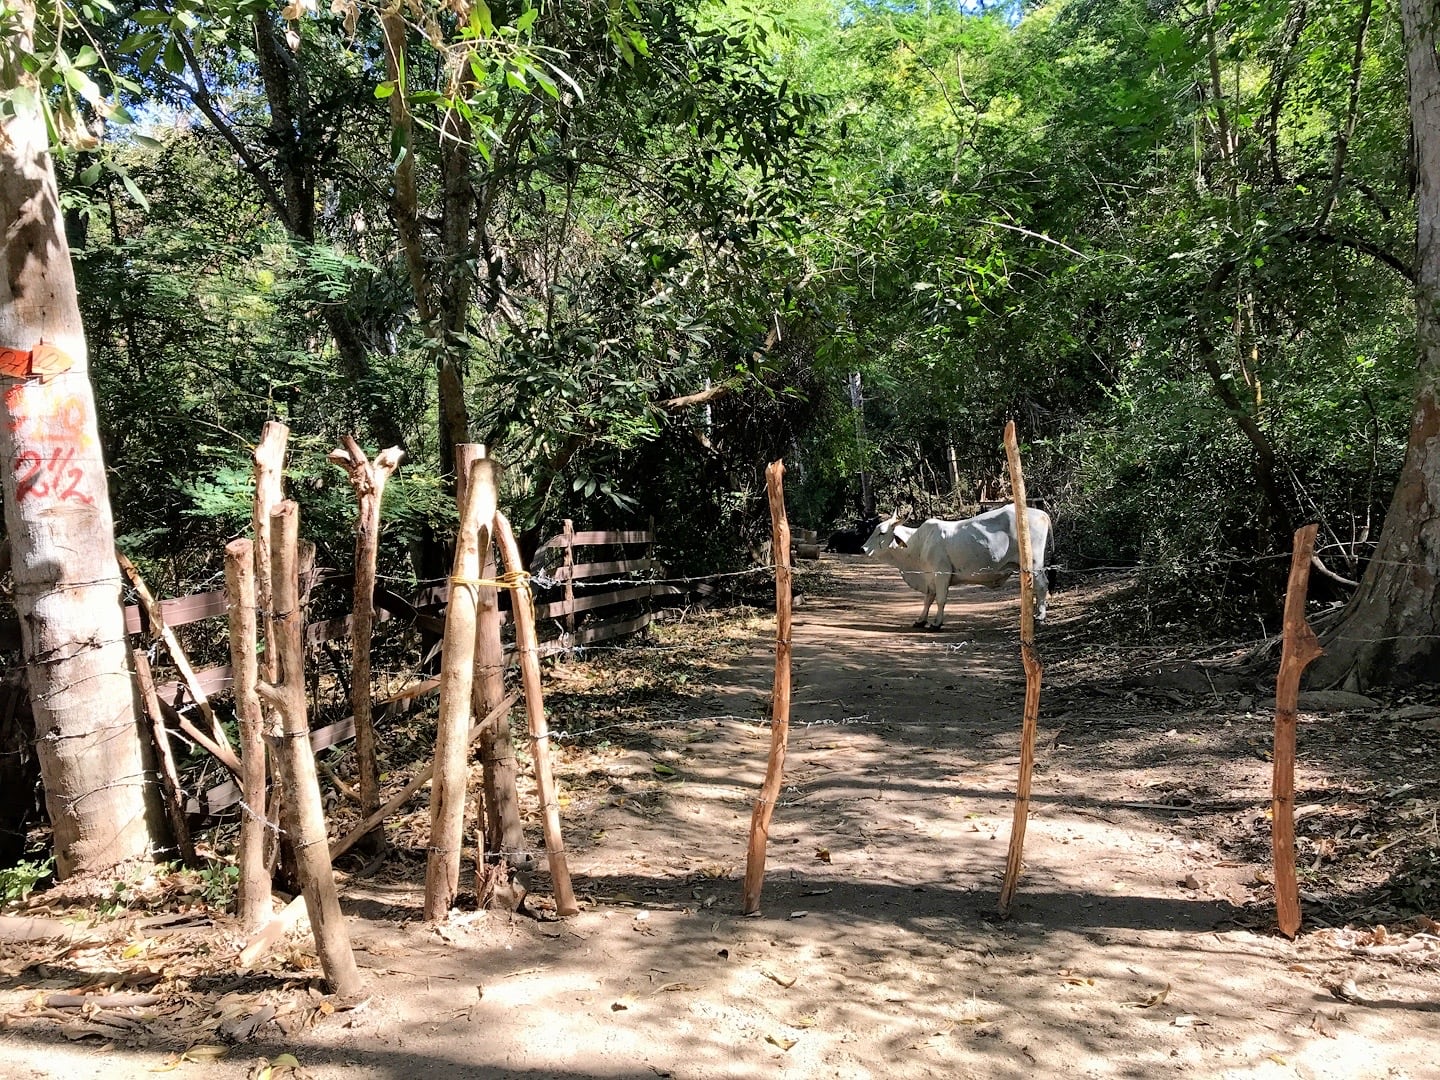 cattle behind fence in jungle